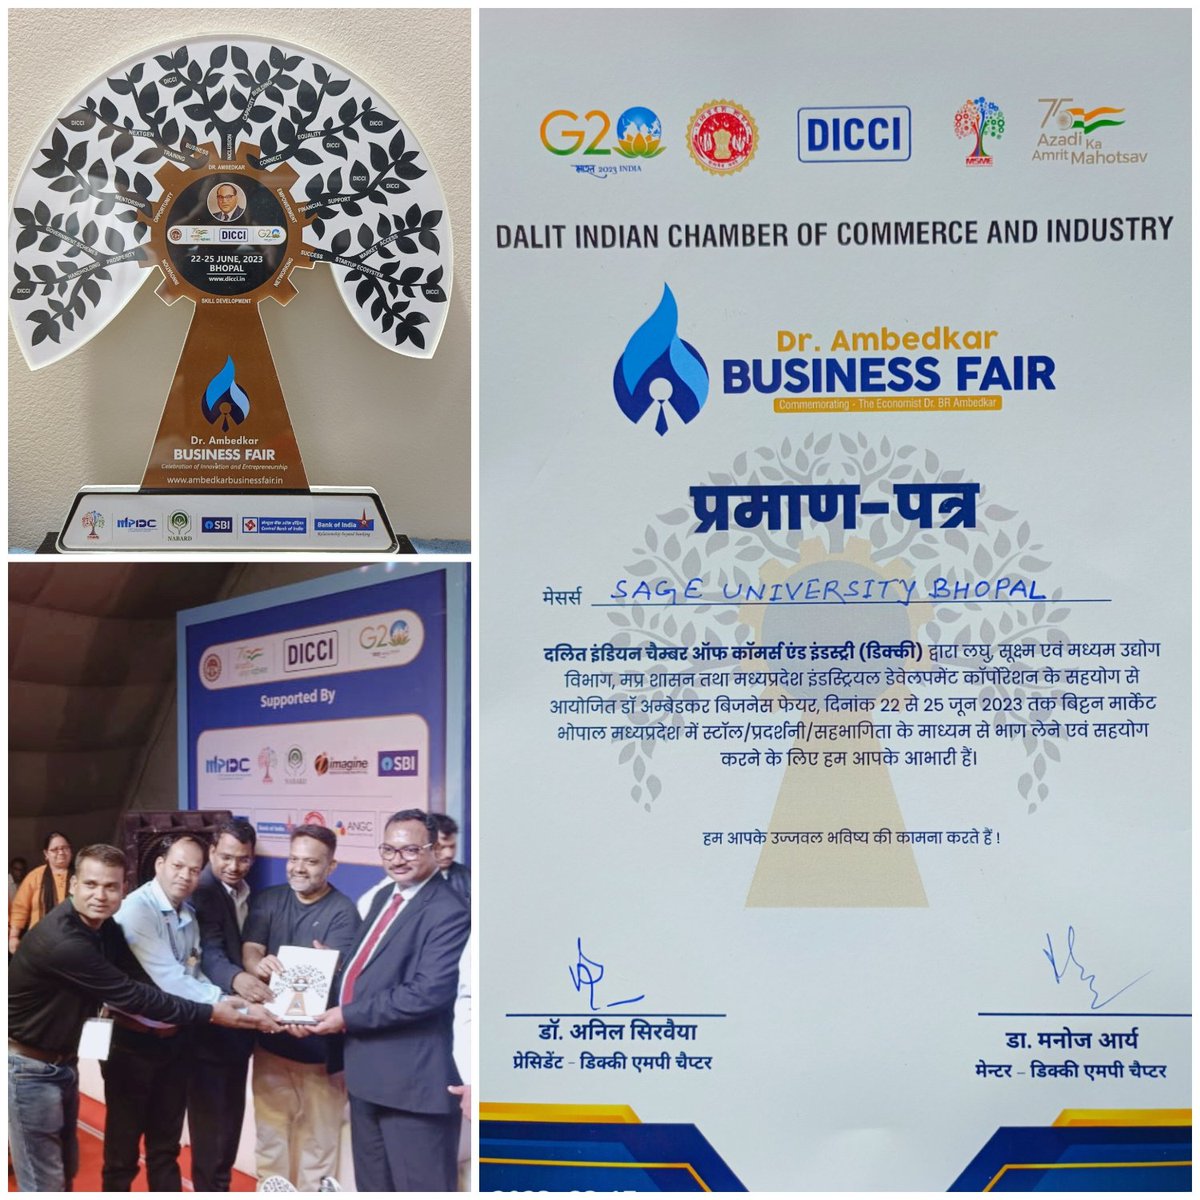 *SAGE UNIVERSITY BHOPAL* Successfully participated in *Dr. Ambedkar Business Fair (22-25th June, 2023)* at Bitten Market Ground, Bhopal)* (Organised by DICCI). 
Kind regards

#sageuniversitybhopal
#sageuniversity
#Thesagegroup
#sagegroup